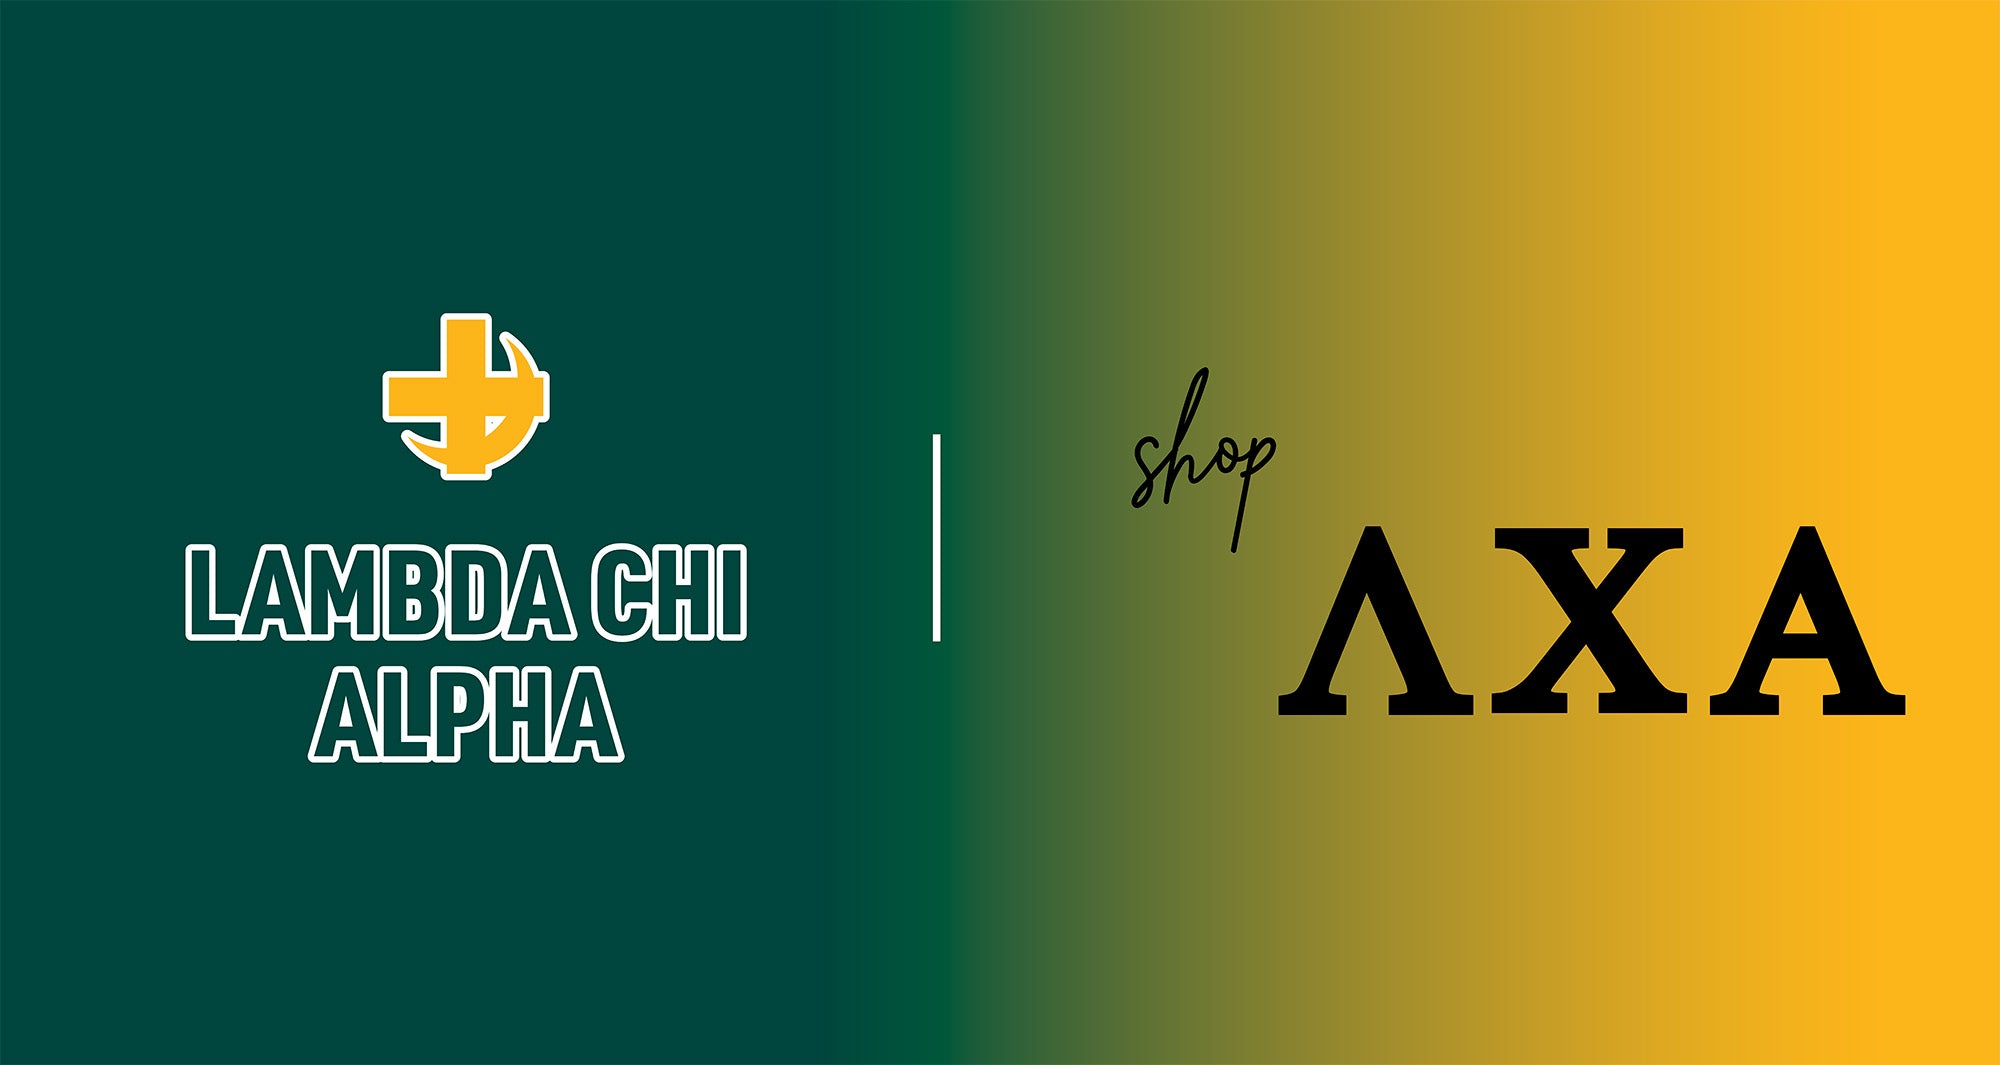 Lambda Chi Alpha home page banner with their logo on a green to yellow gradient background. 